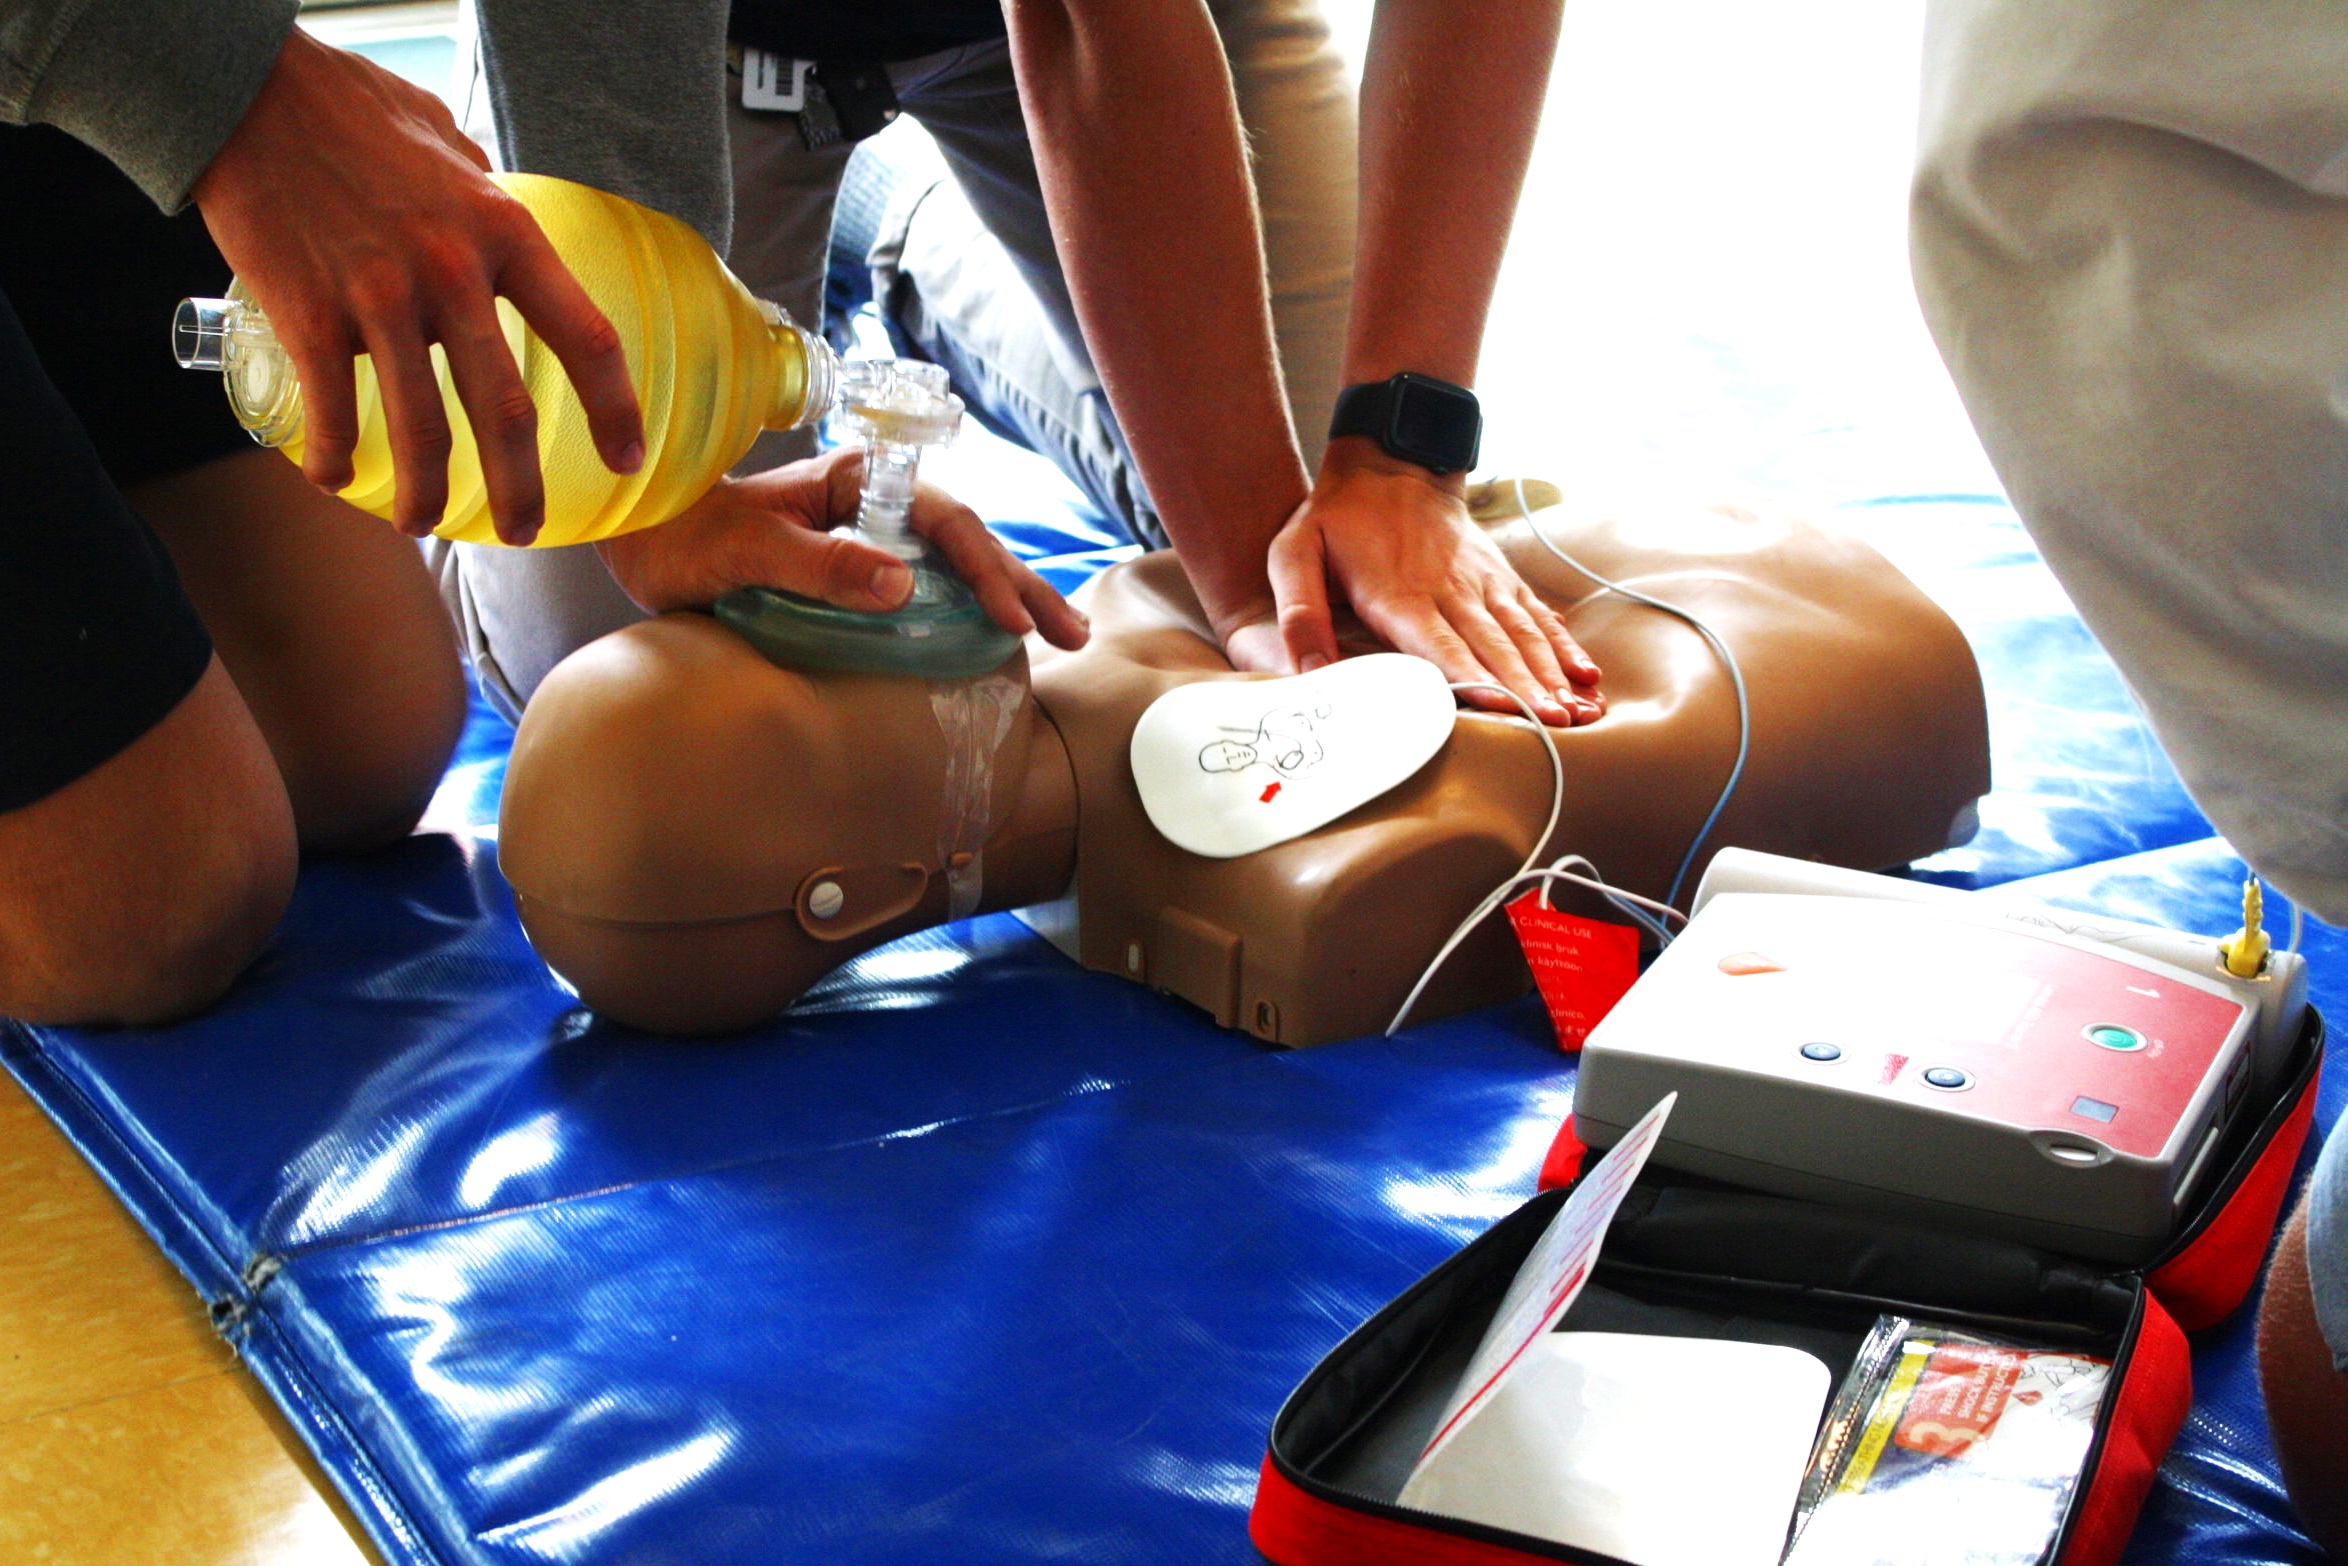 CPR/FIRST AID